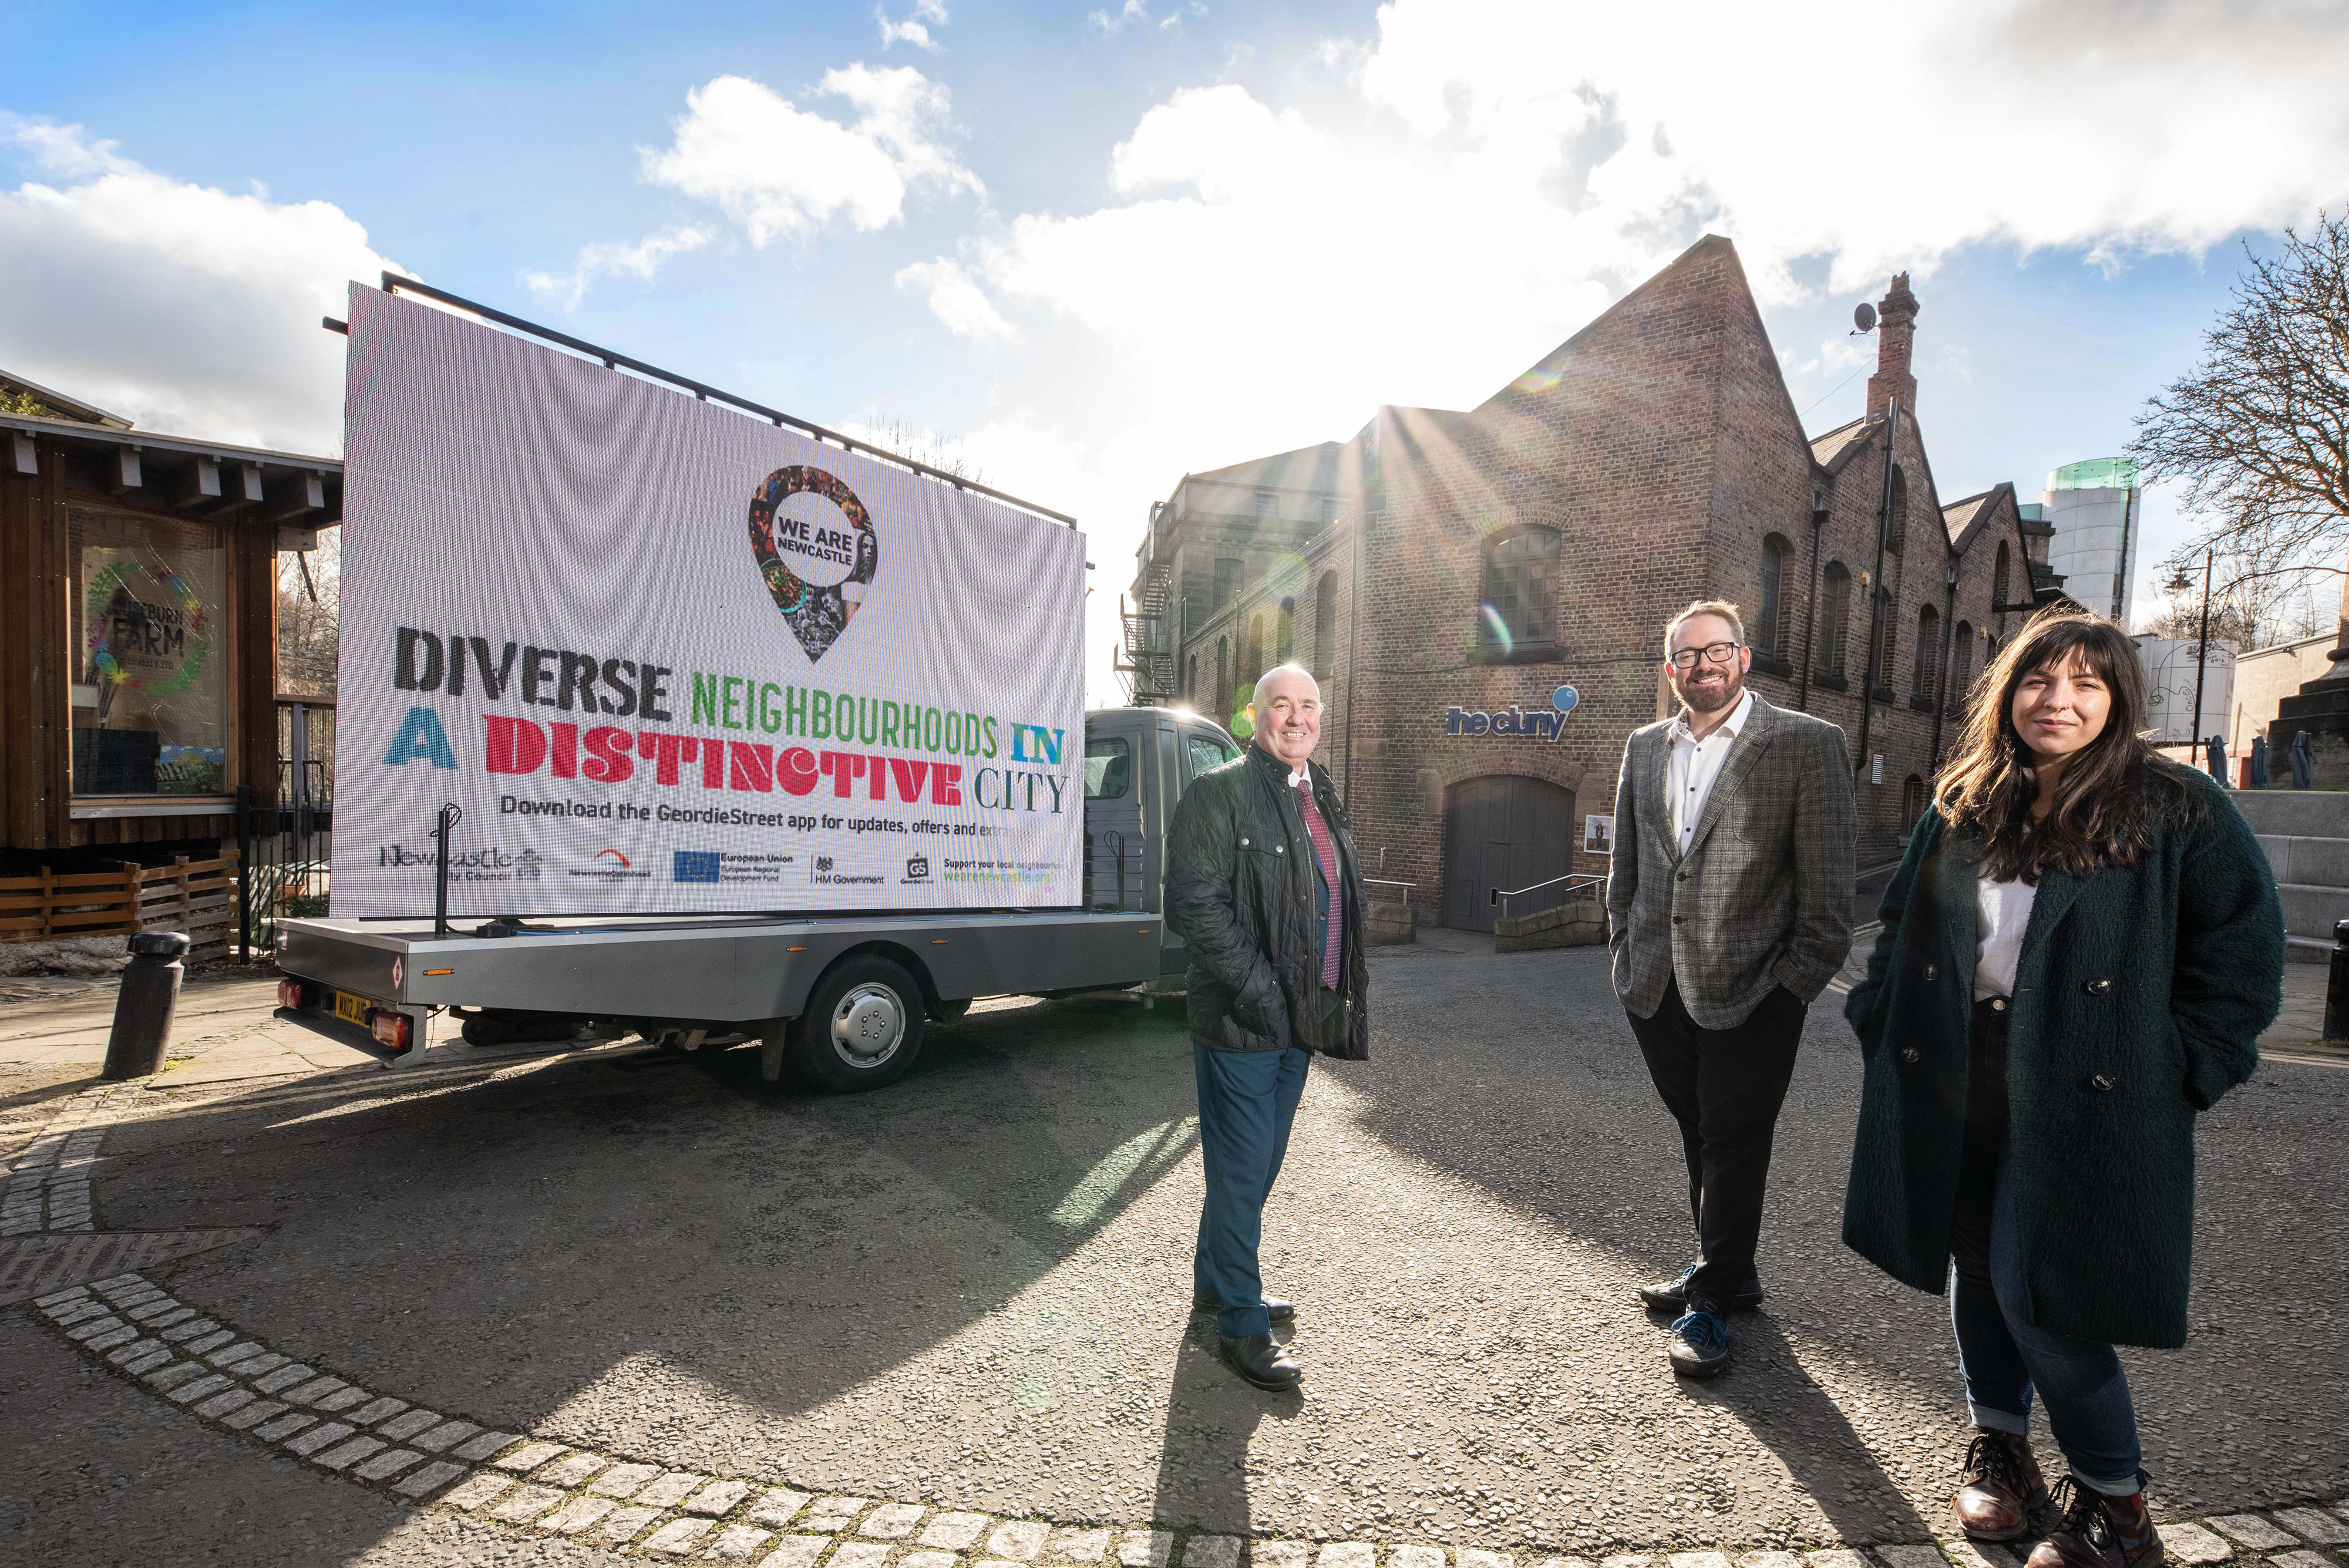 Three people stood next to a van with a large poster attached to the side promoting the Ouseburn neighbourhood